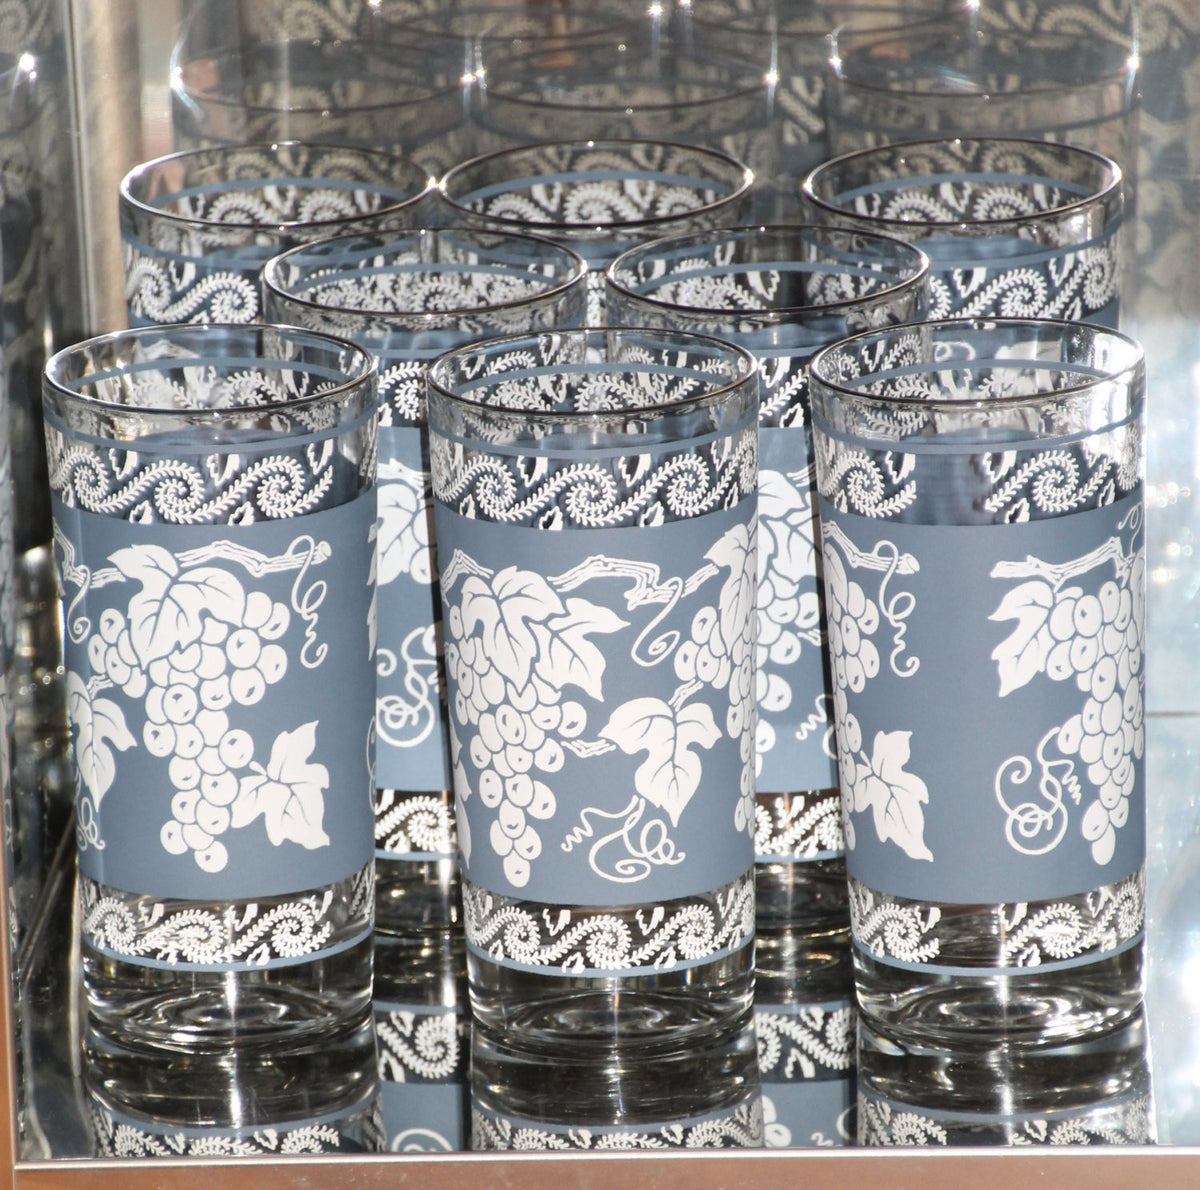 http://scotch-street-vintage.myshopify.com/cdn/shop/products/vintage-glassware-of-tall-tumbler-glasses-1960s-anchor-hocking-blue-and-white-grape-pattern-with-silver-rim-set-of-8-barware-875844_1200x1200.jpg?v=1604509046